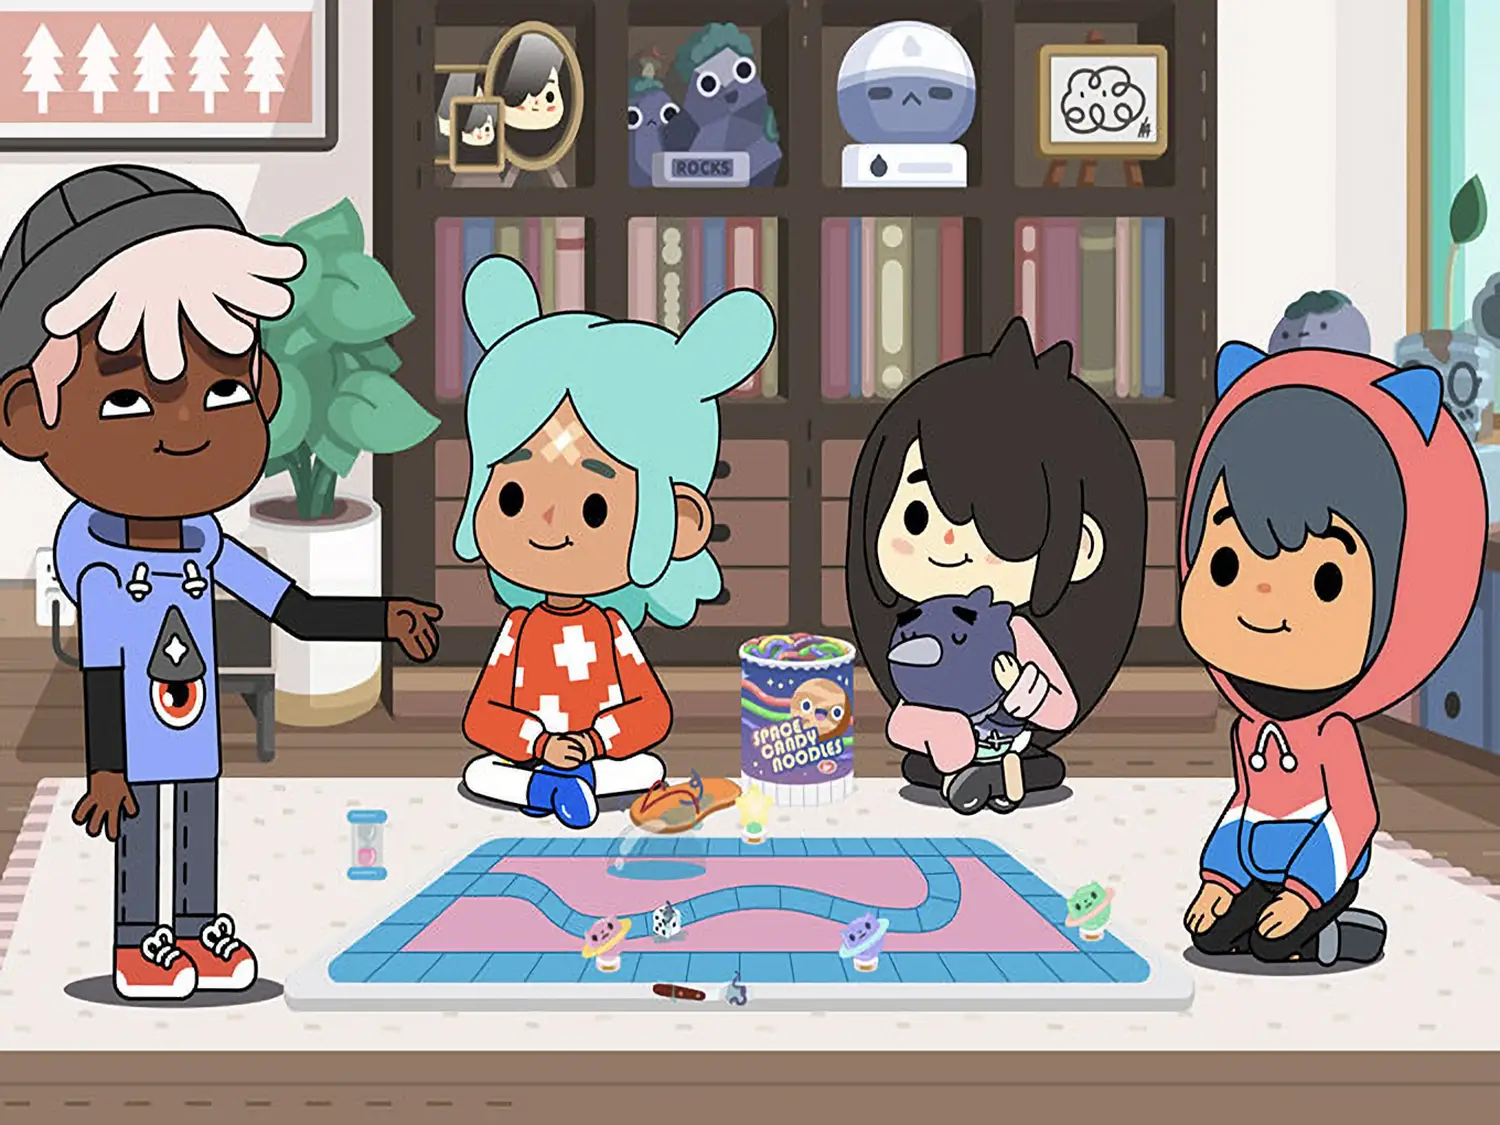 A Toca Boca scene displaying diverse and non-binary characters.